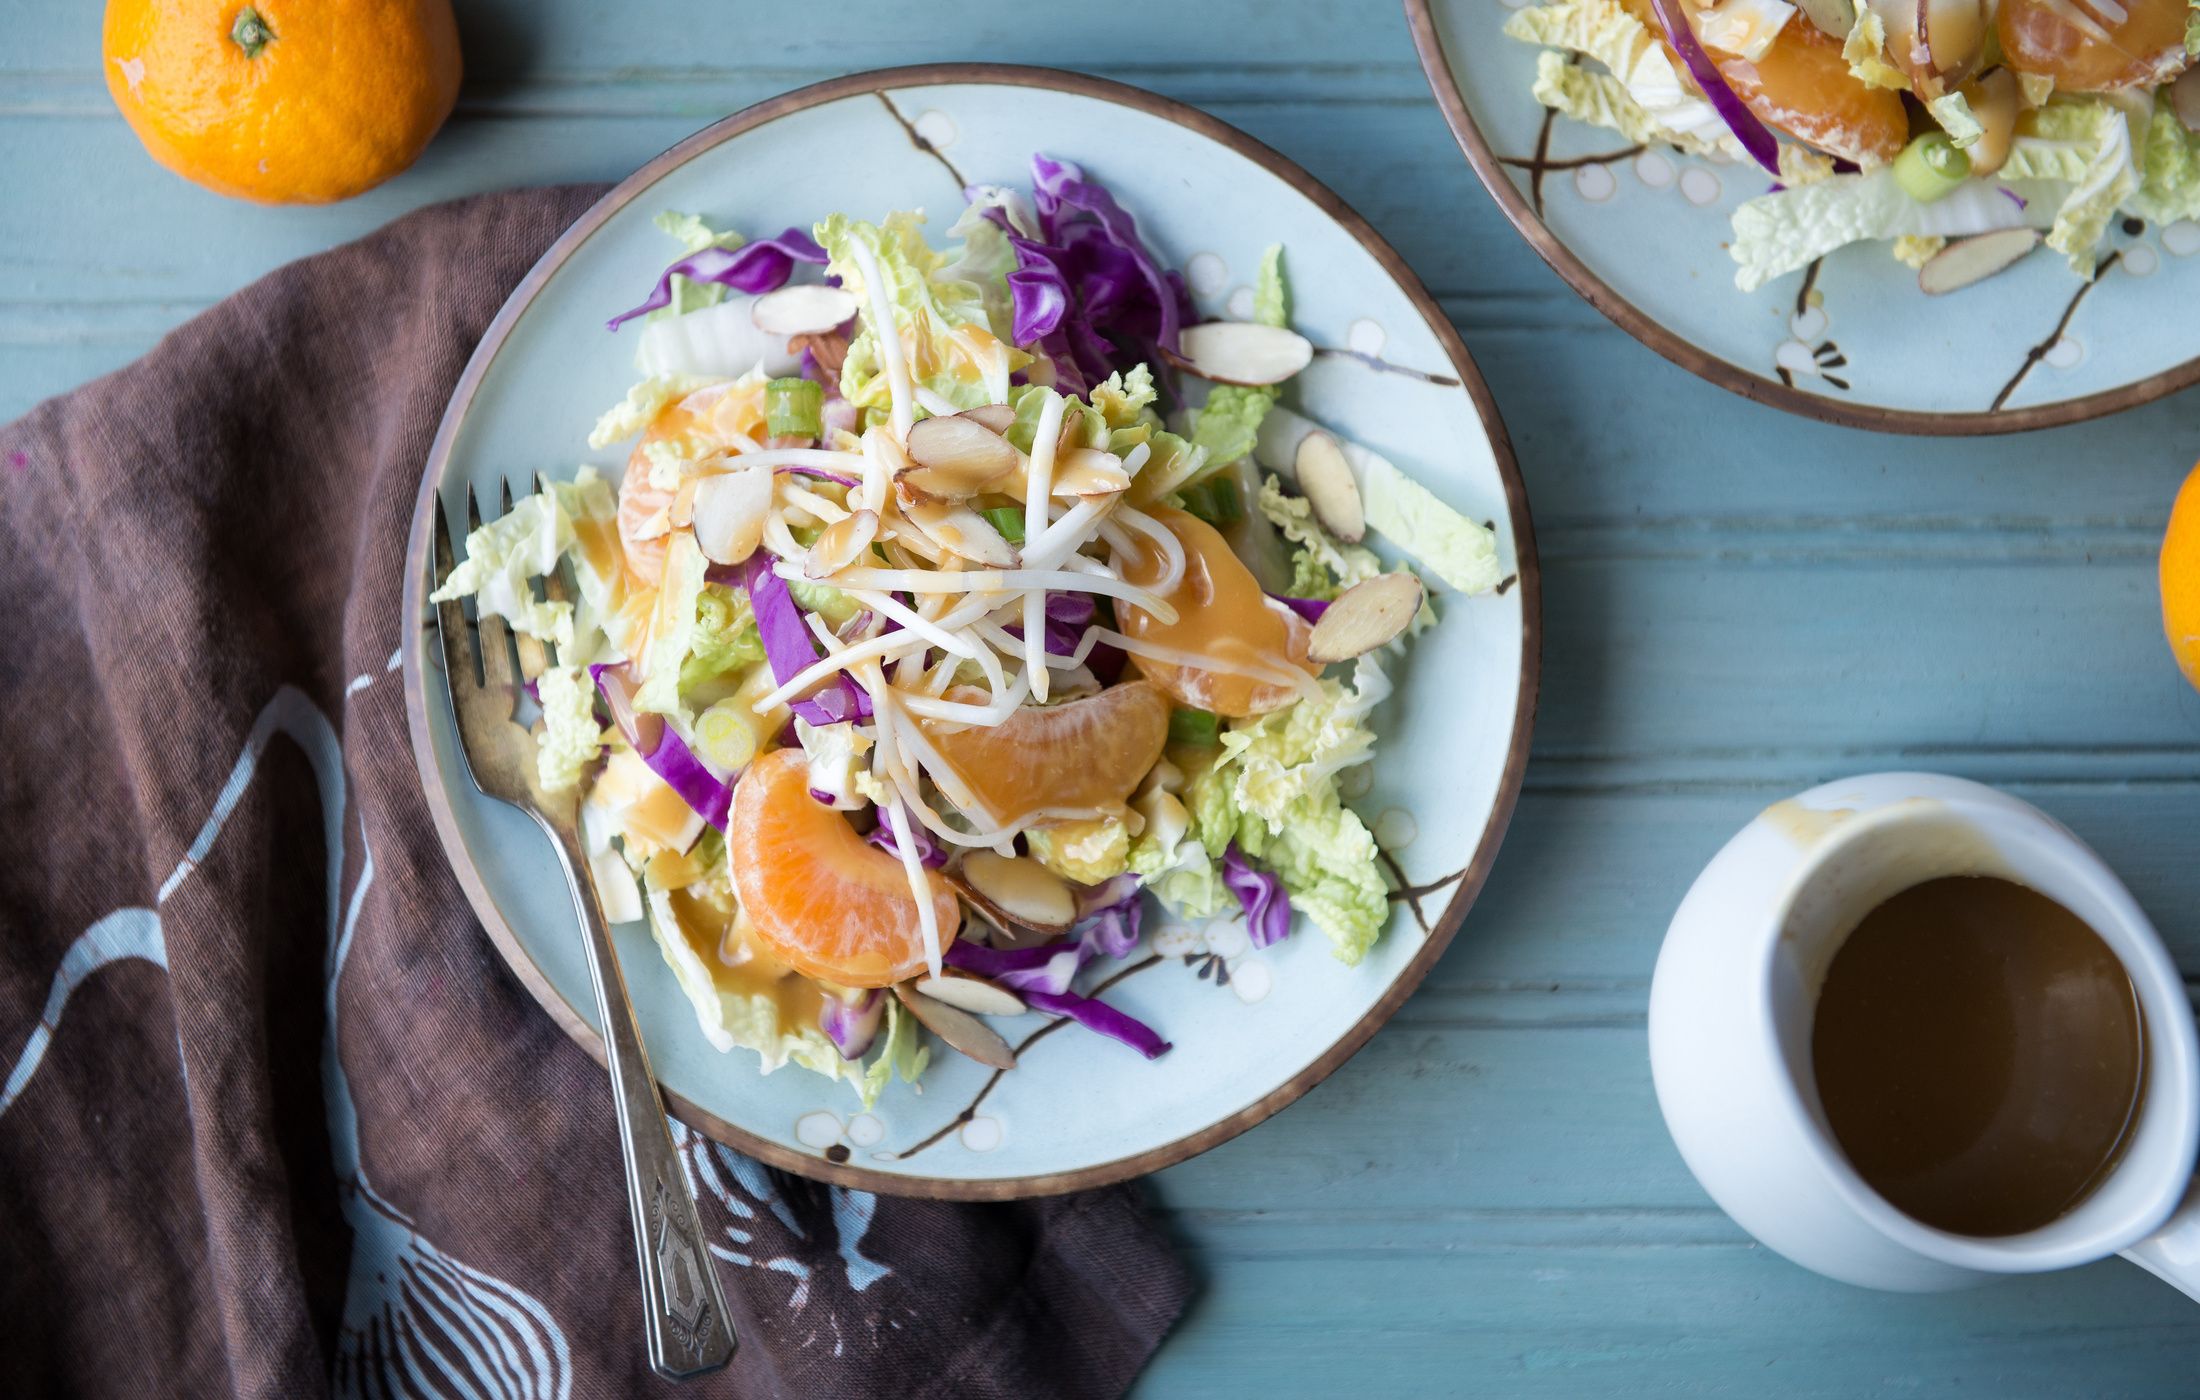 Cabbage Salad with Mandarins and Mung Bean Sprouts